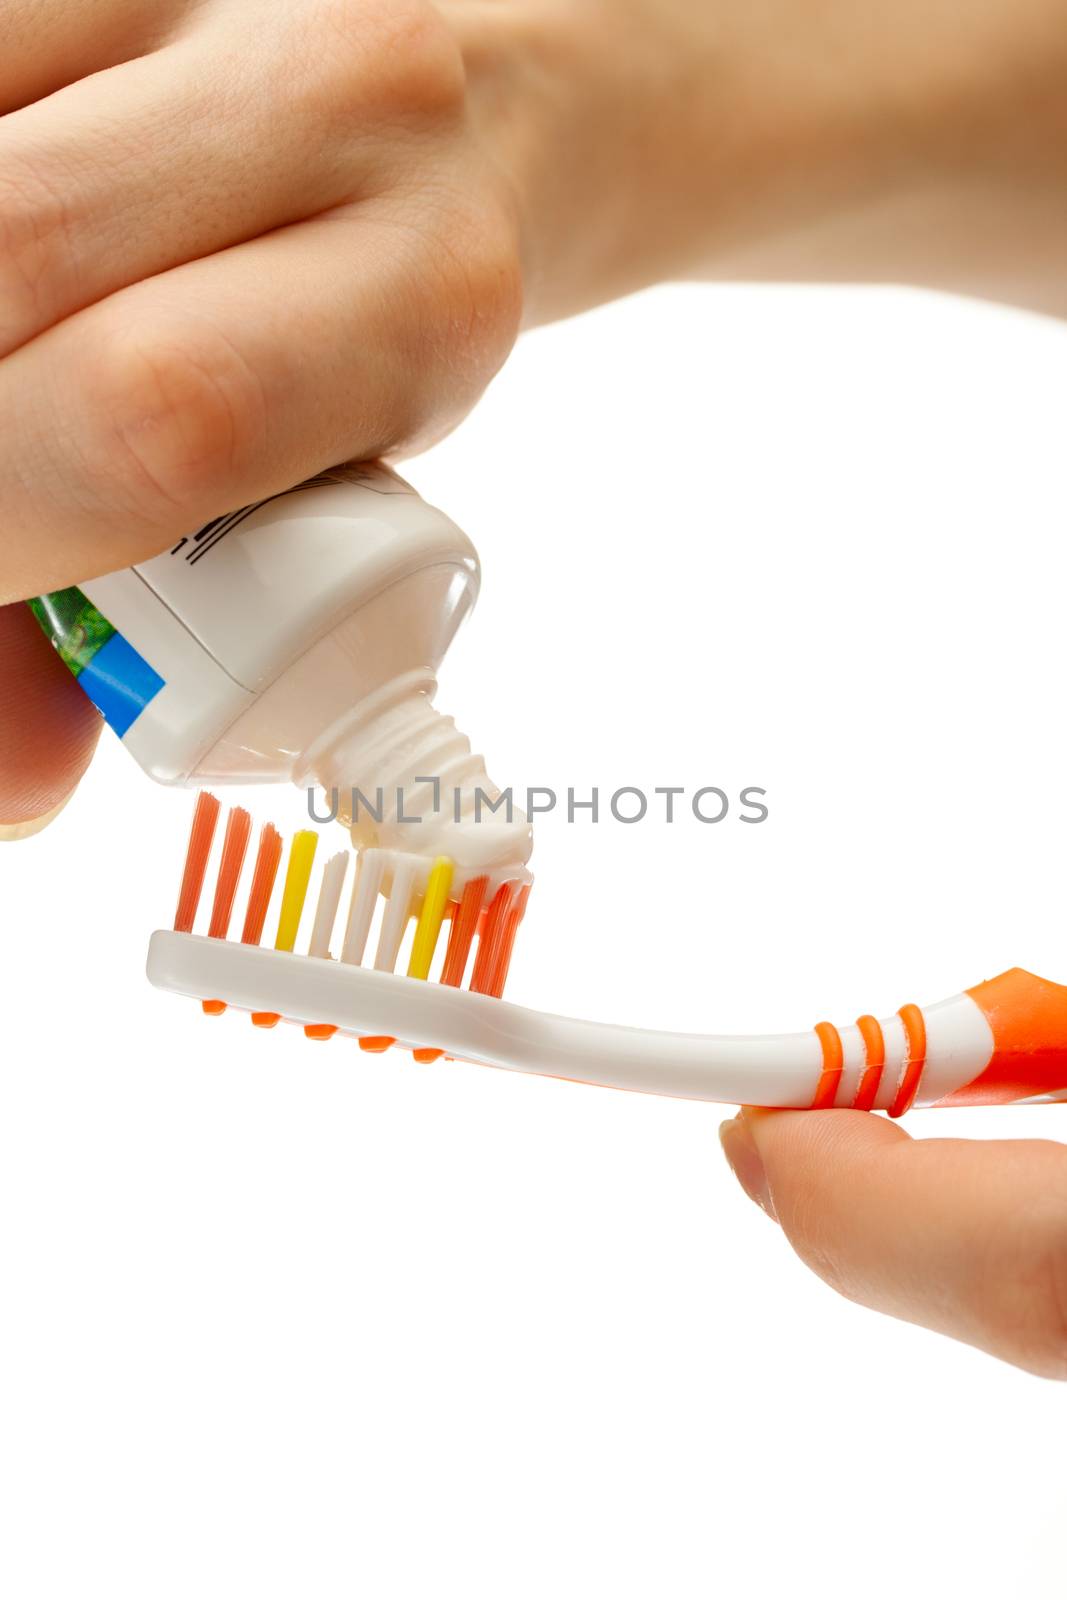 Toothbrush and toothpaste in female hands 